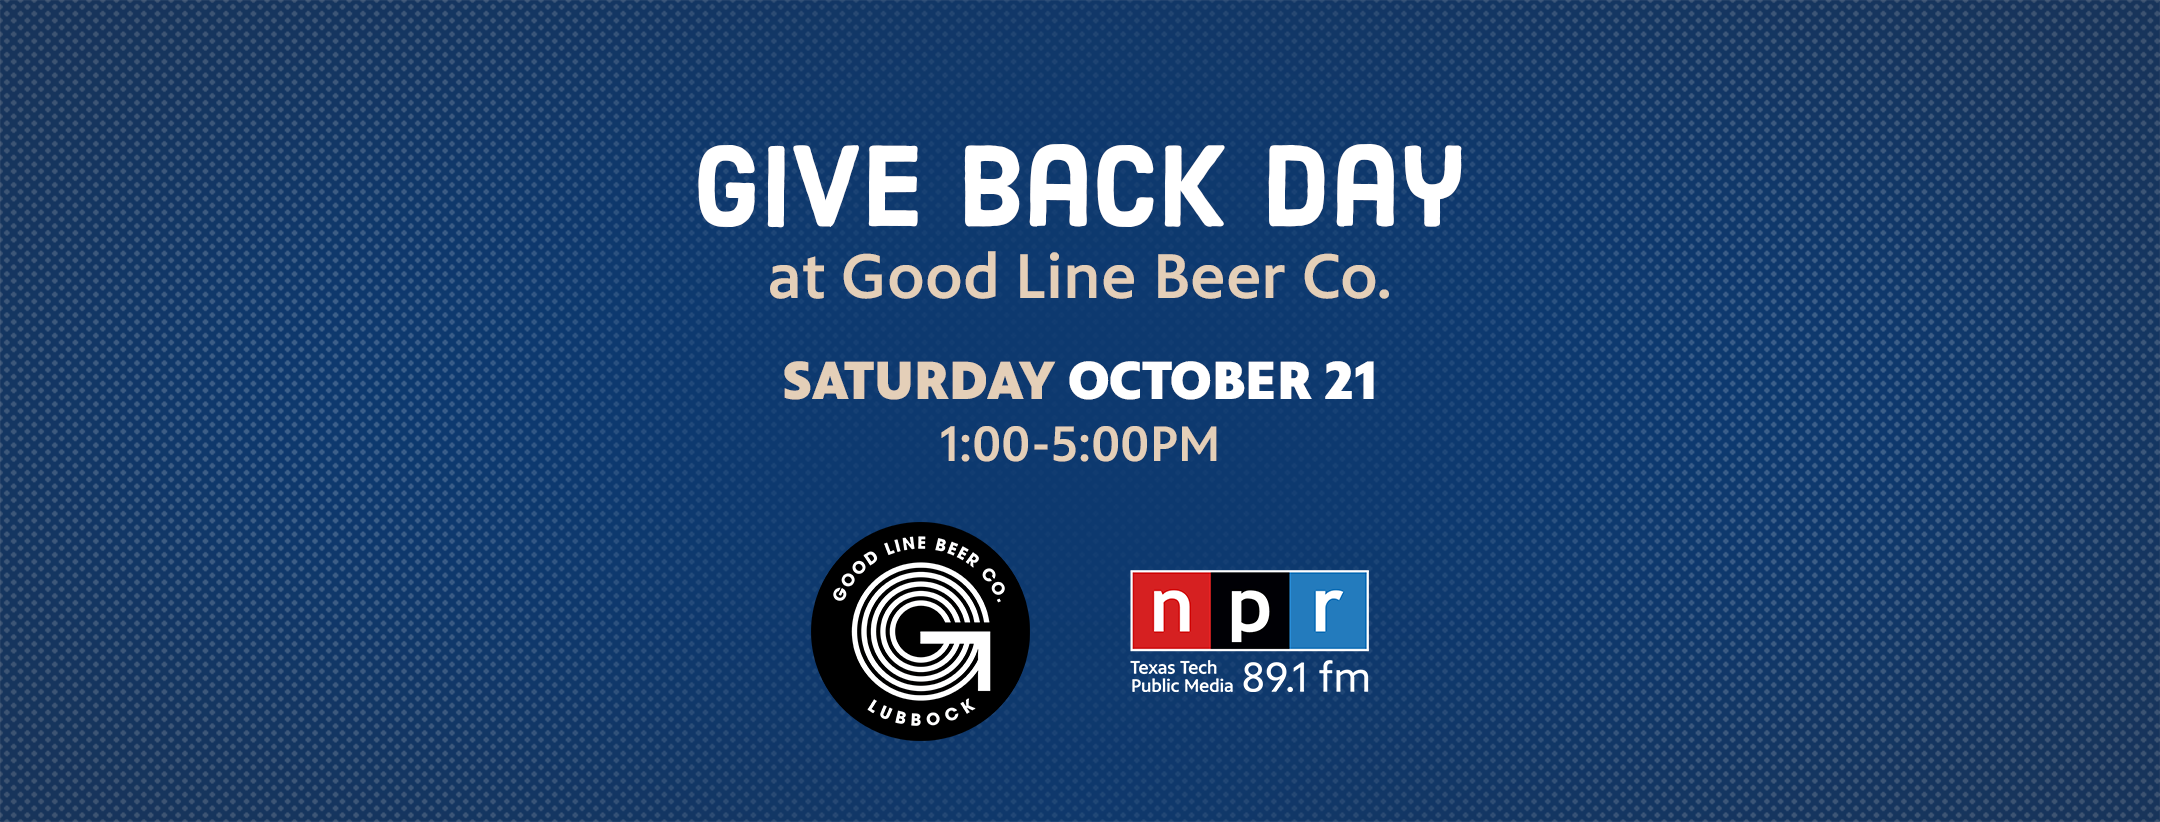 Give Back Day at Good Line Beer Co.